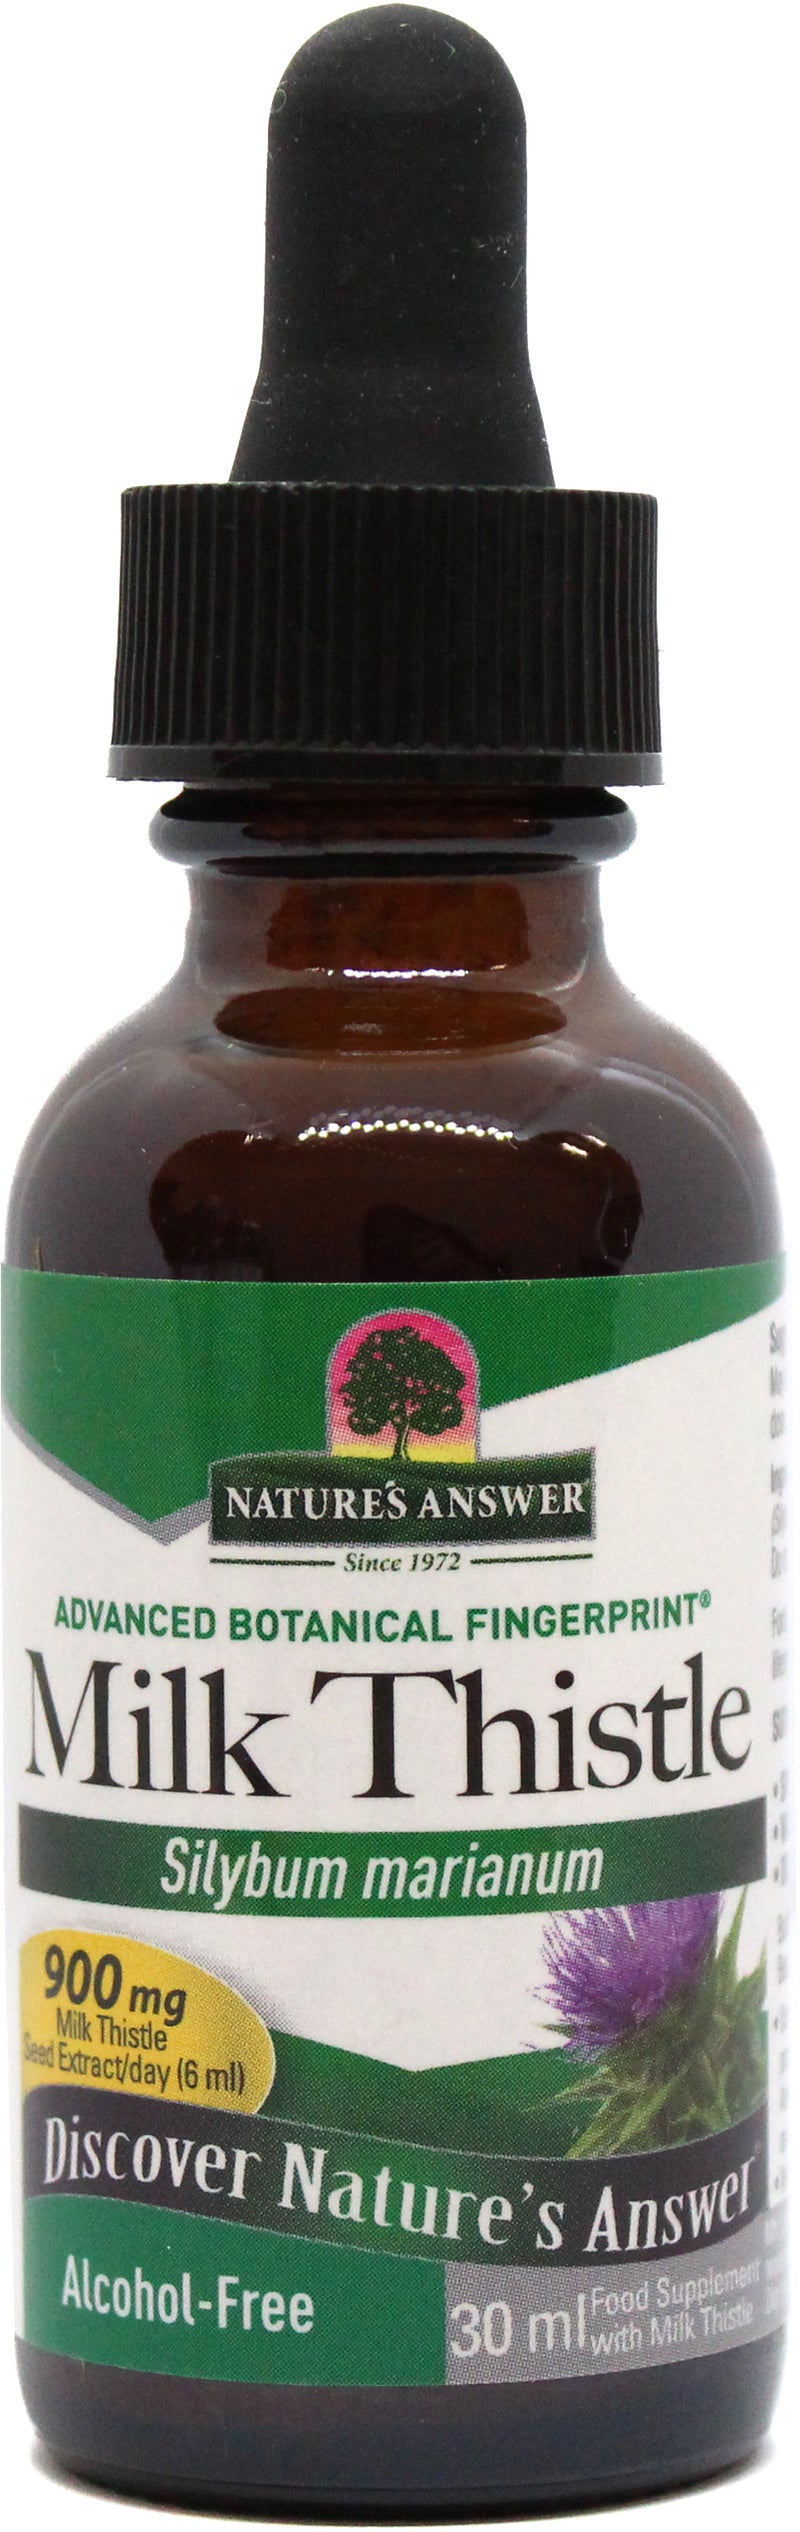 Nature’s Answer Milk Thistle Seed (Alcohol-Free)